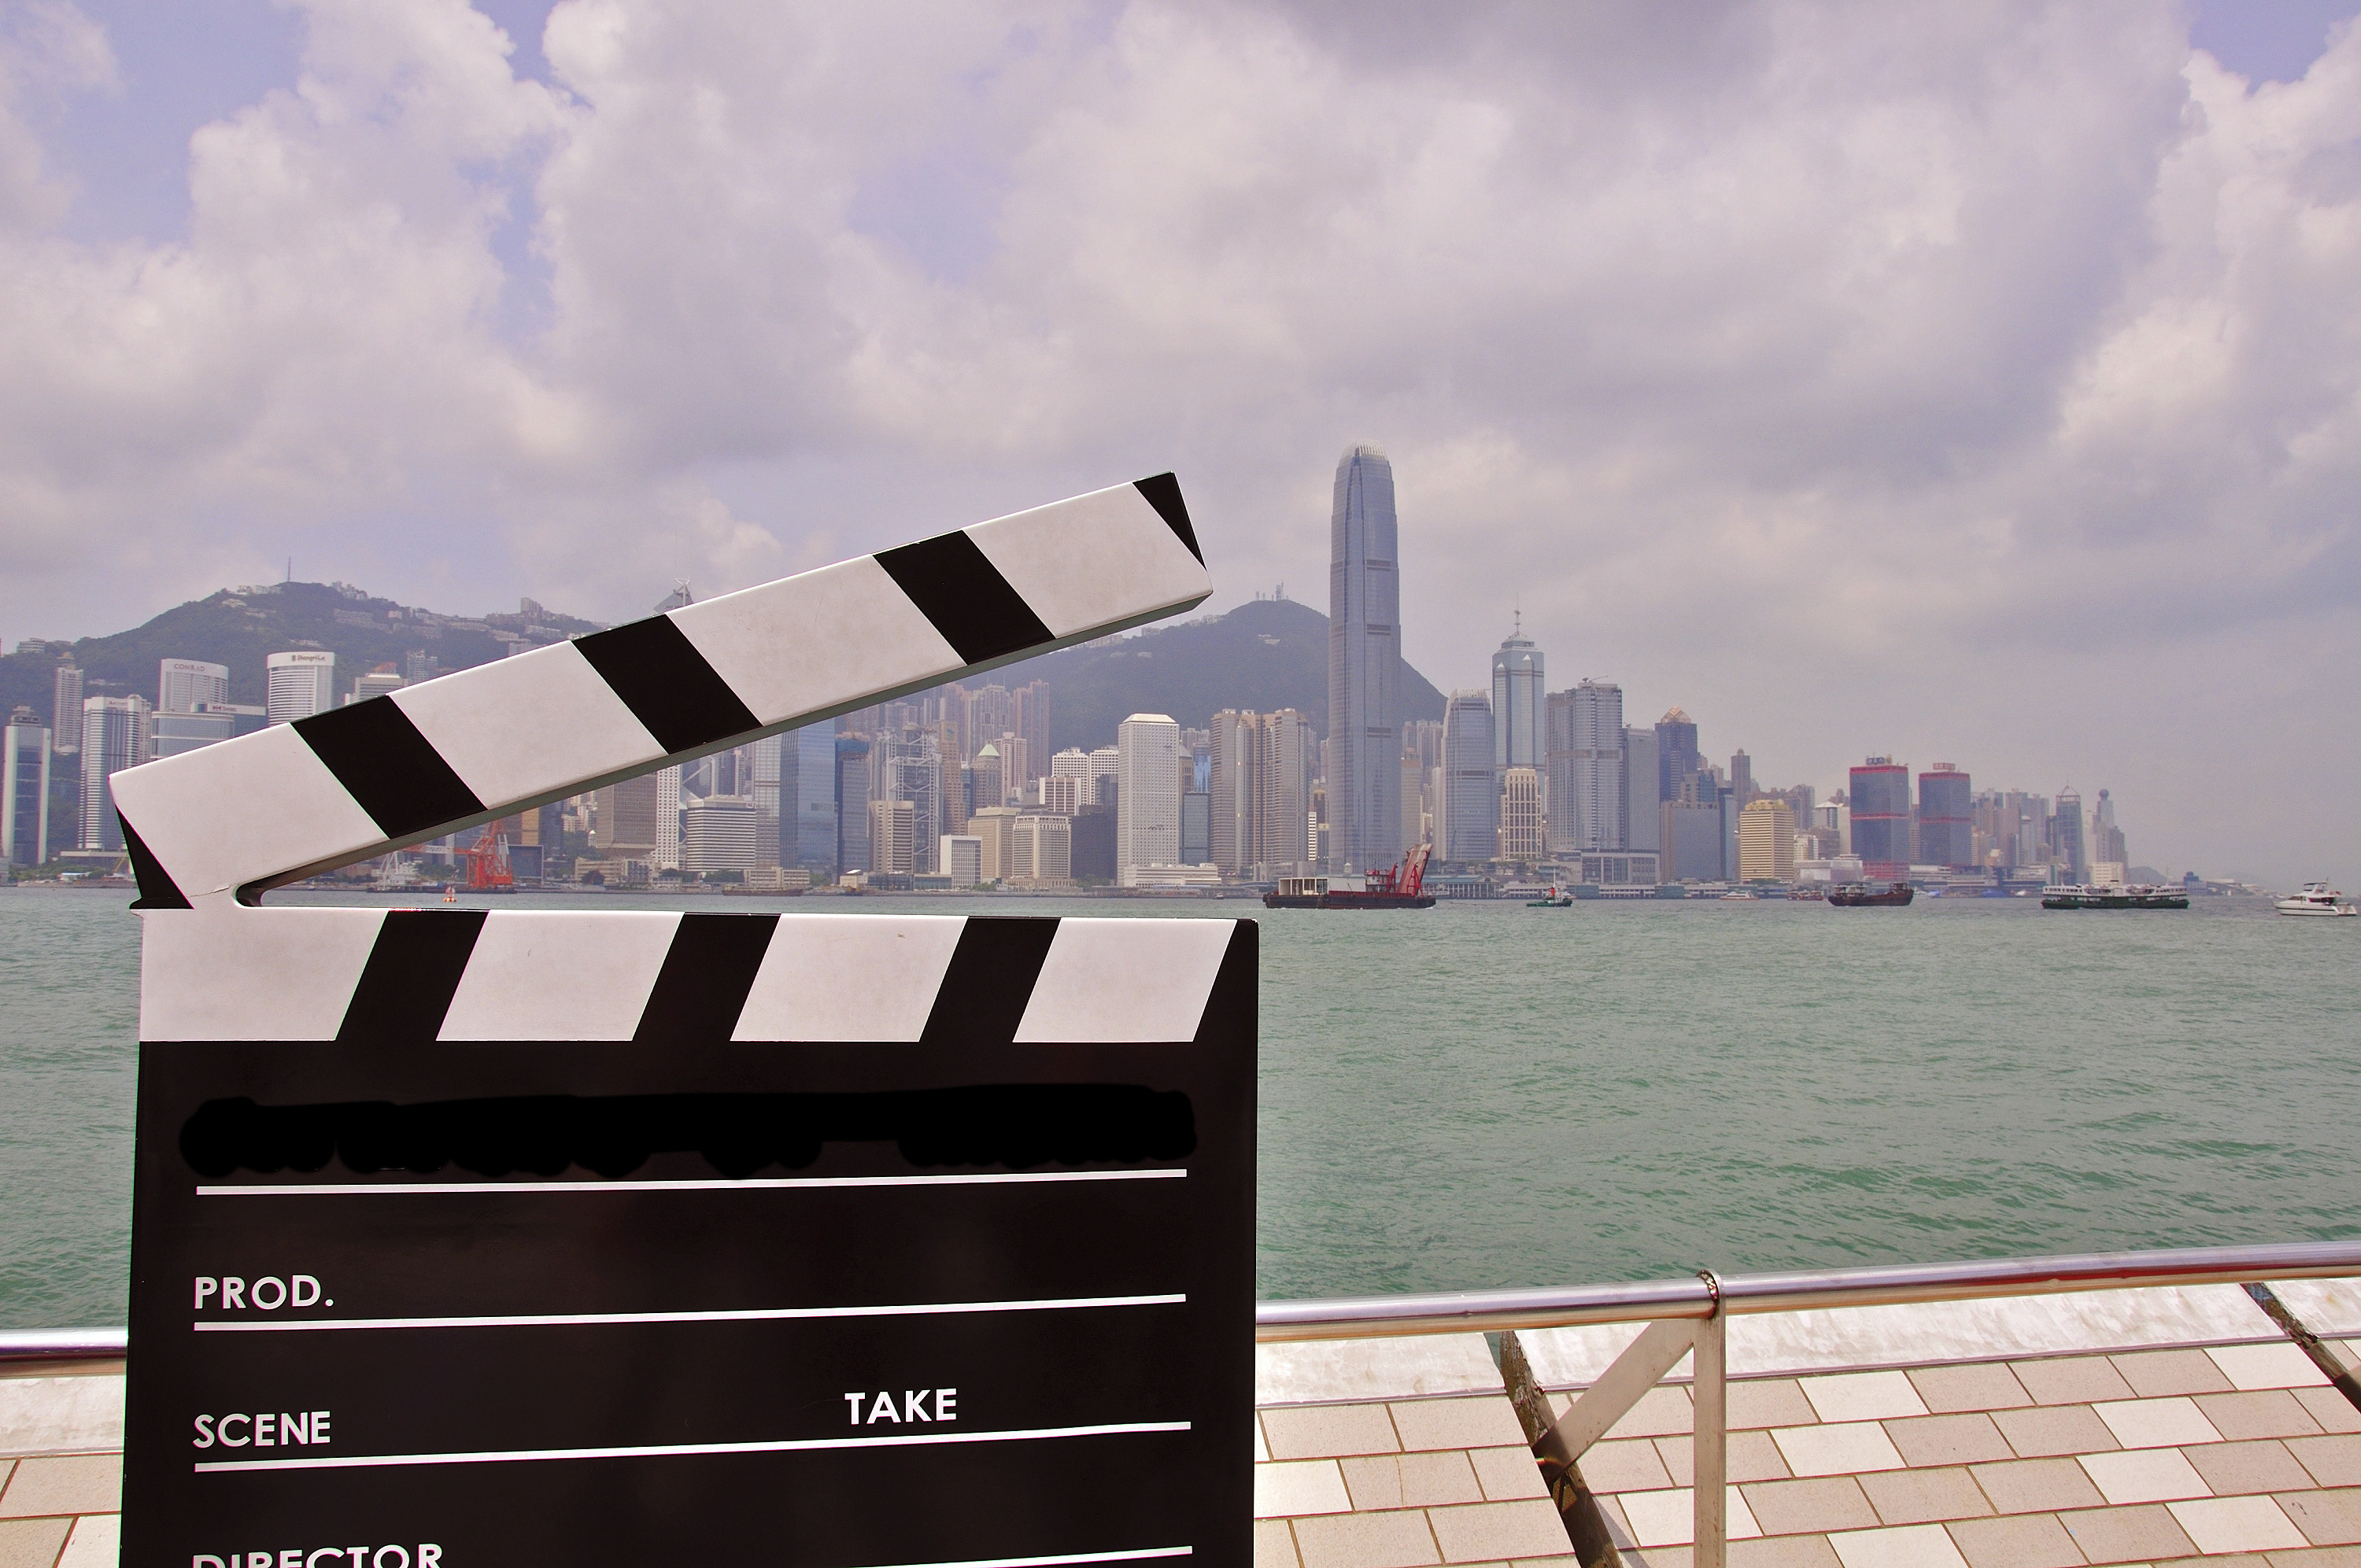 China city scape from across a sea and a black and white clapperboard 